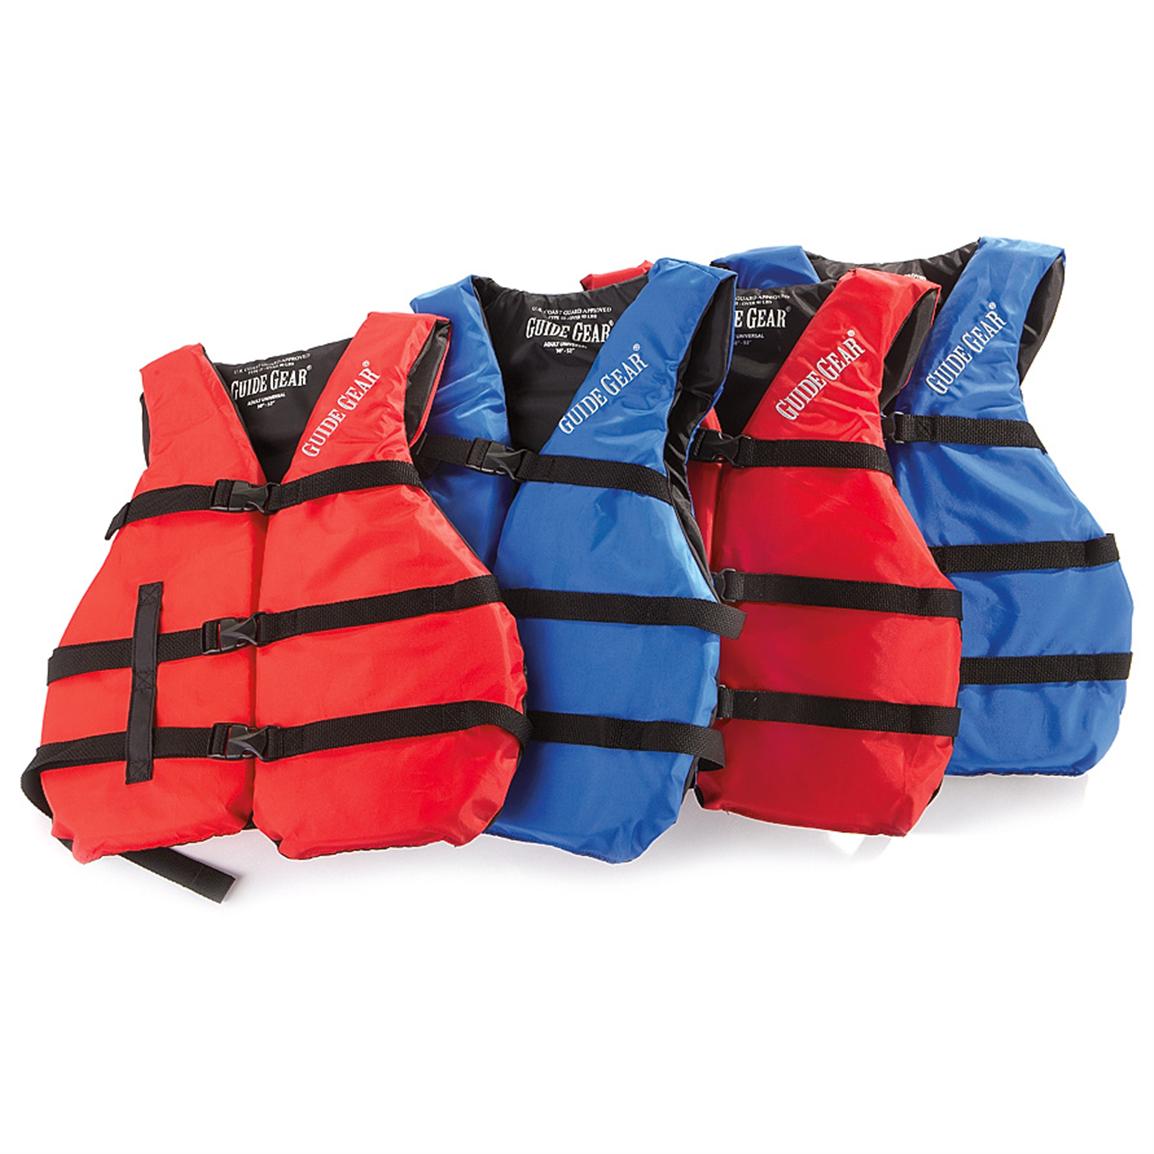 Guide Gear Universal Life Jackets, 4 Pack with Storage Bag, 30&quot; to 52&quot; Chest - 217996, Universal ...